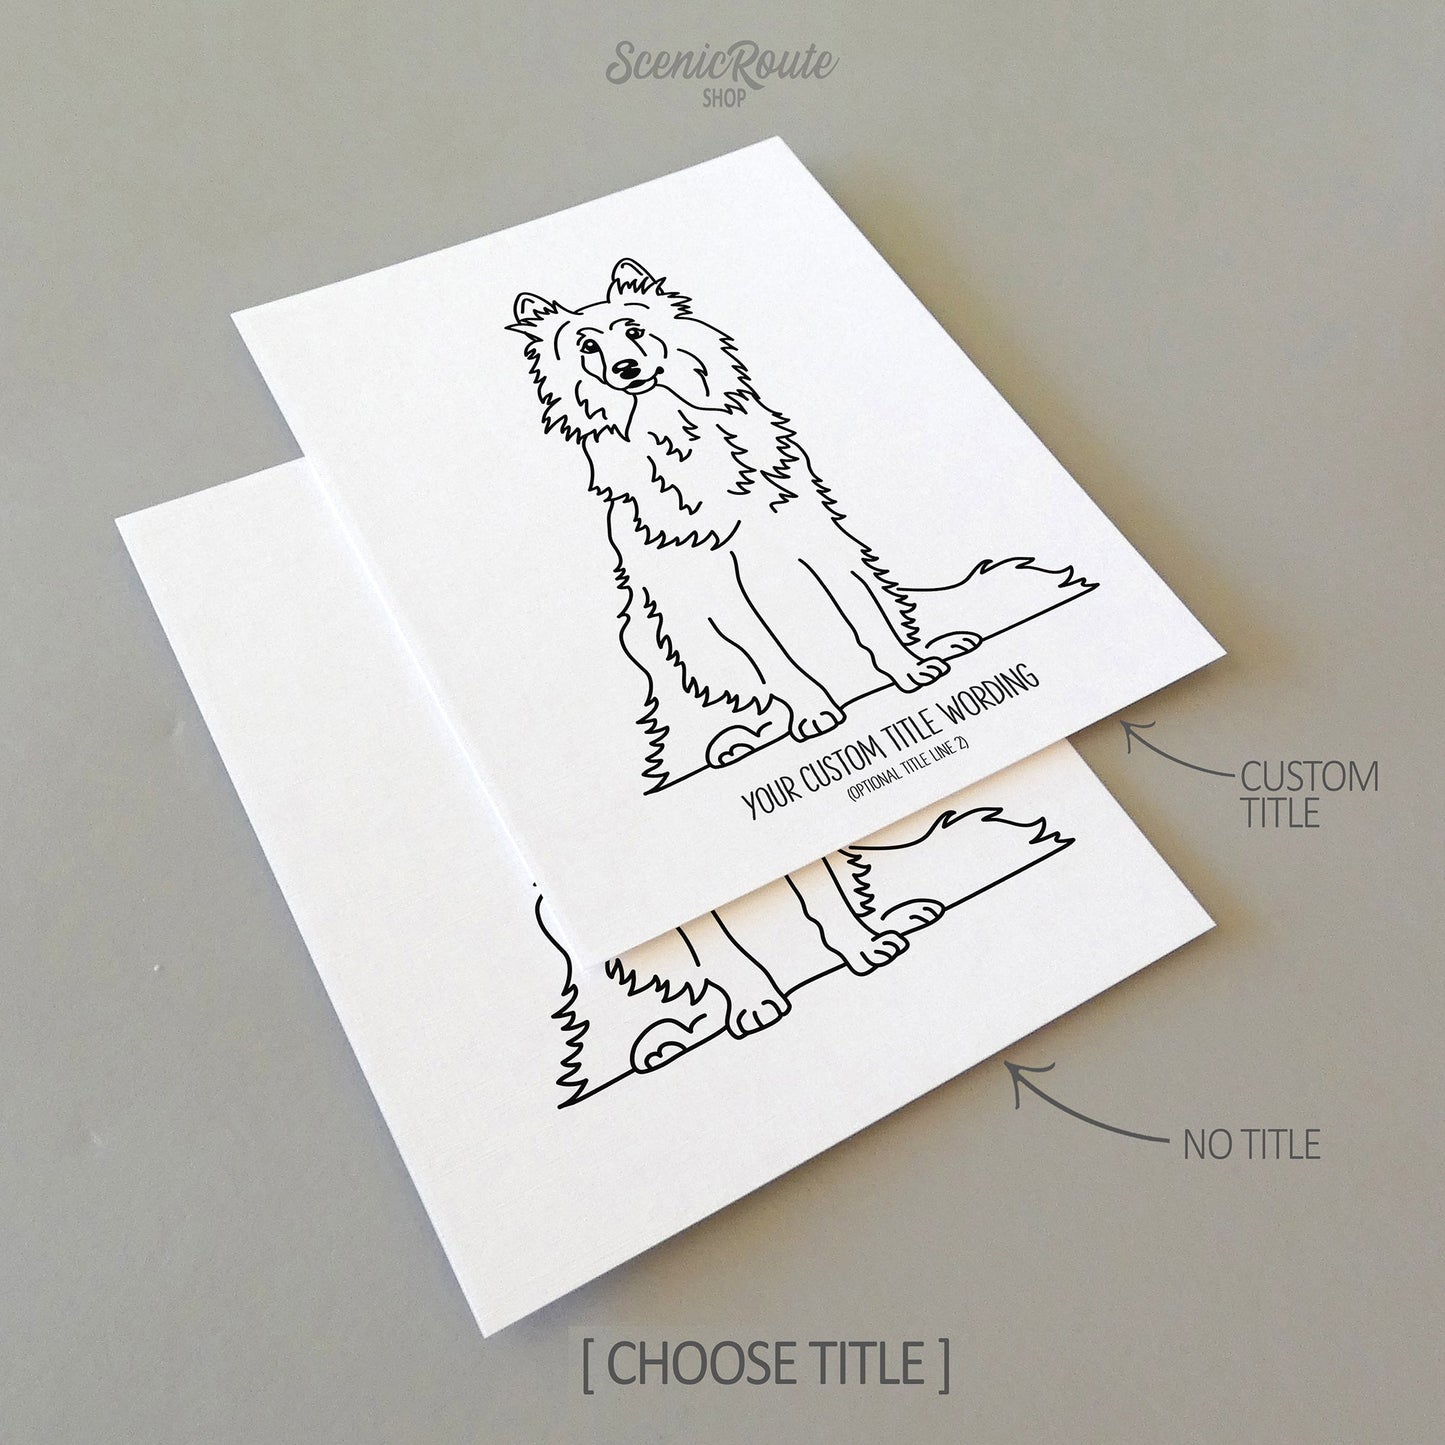 Two line art drawings of a Shetland Sheepdog dog on white linen paper with a gray background.  The pieces are shown with “No Title” and “Custom Title” options for the available art print options.